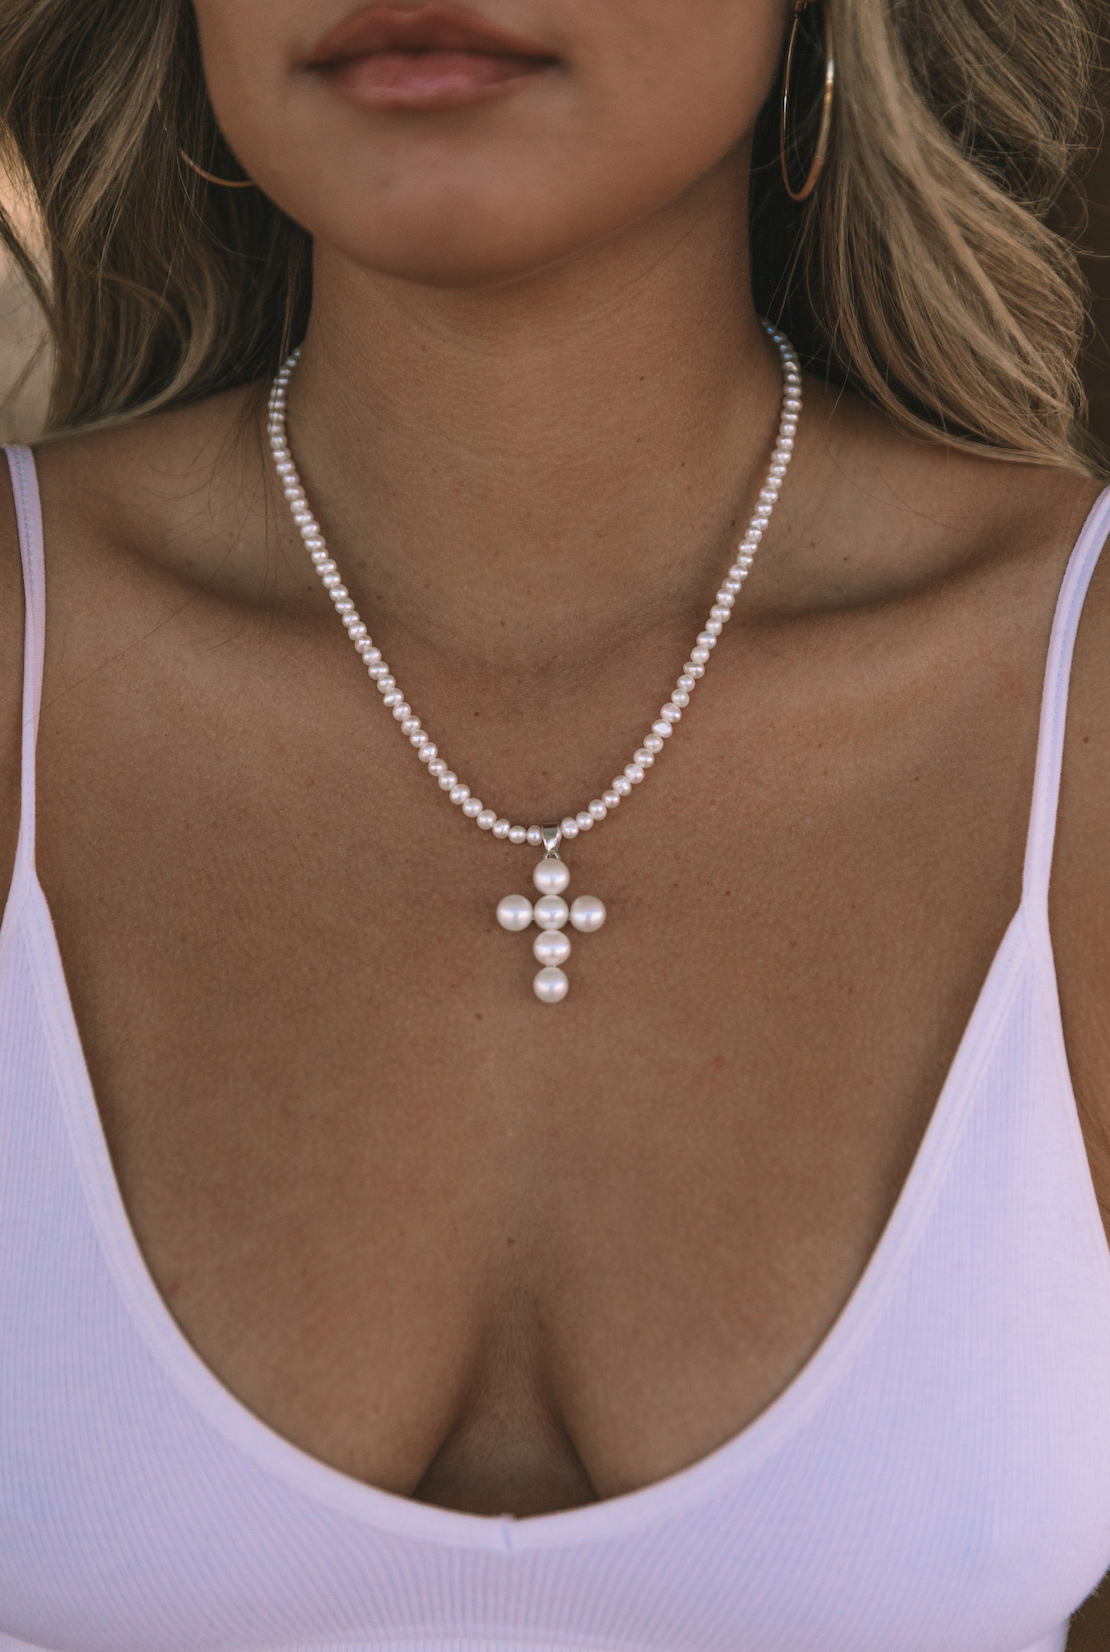 The Heavenly Pearl Necklace